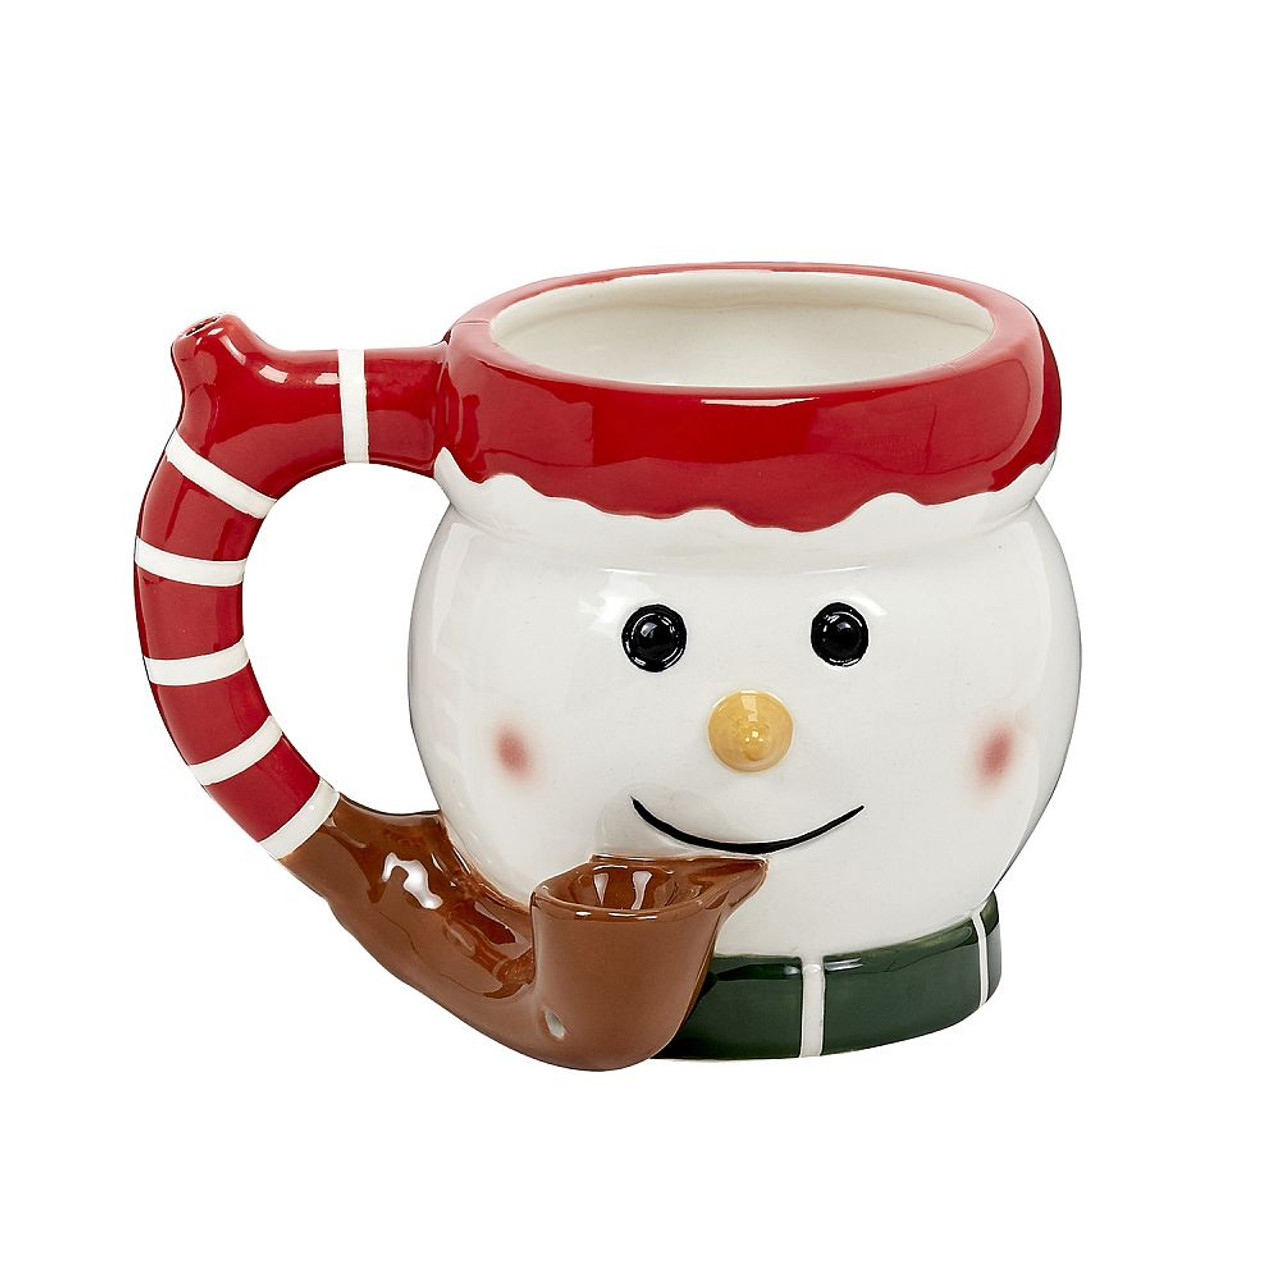 Are you looking for a great gift for the holiday season, for the person who has everything? This delightful Snowman Roast & Toast Mug will make them smile!